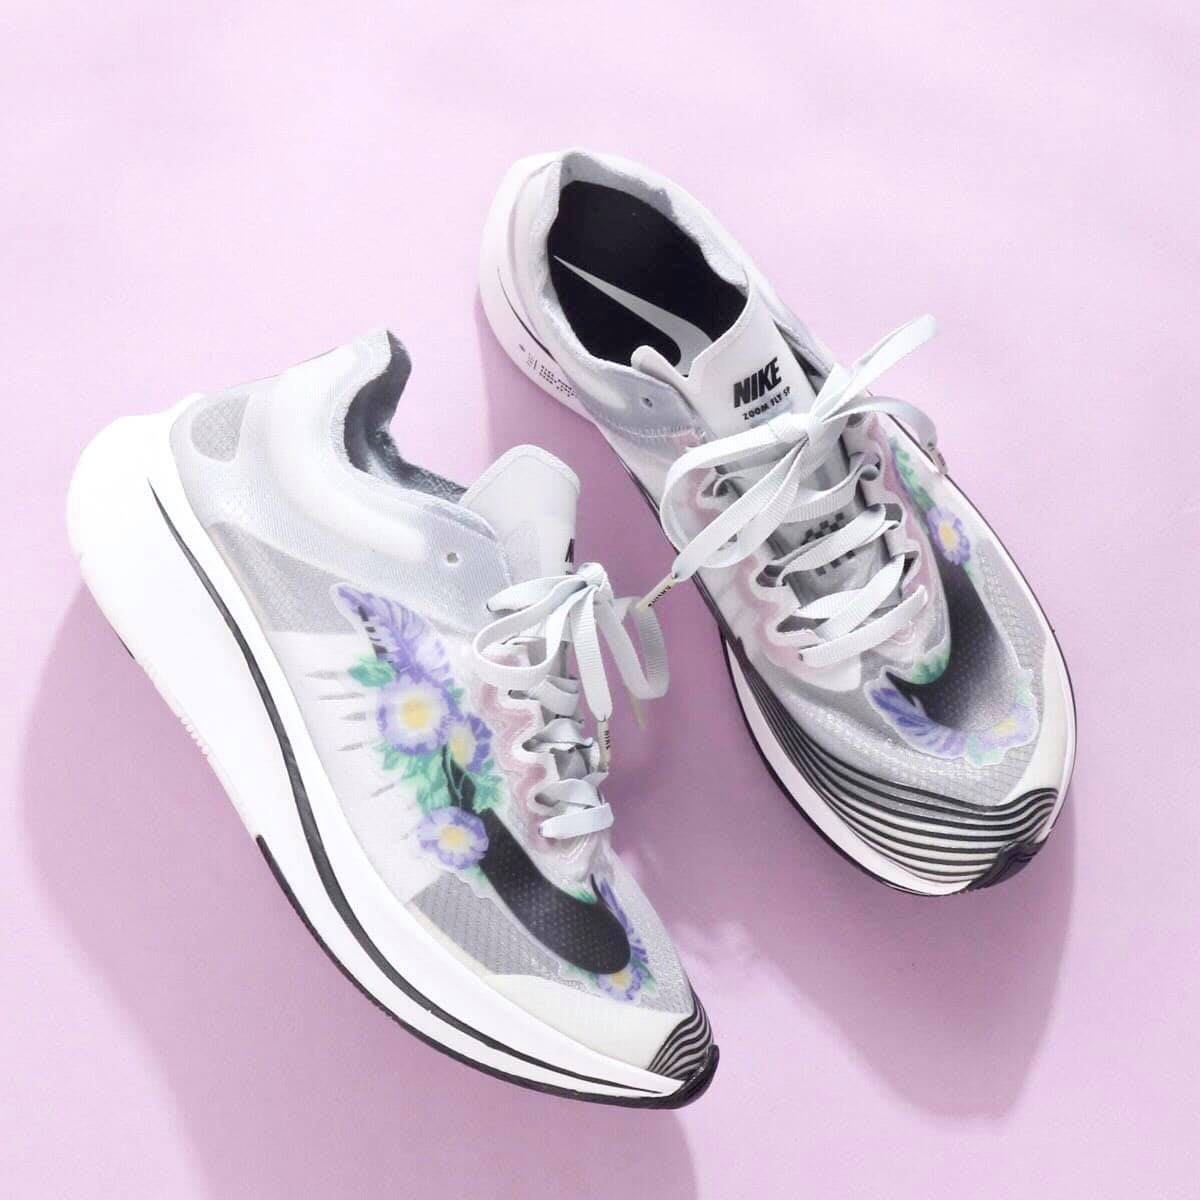 Cheers】NIKE ZOOM FLY SP FLORAL 慢跑花卉 